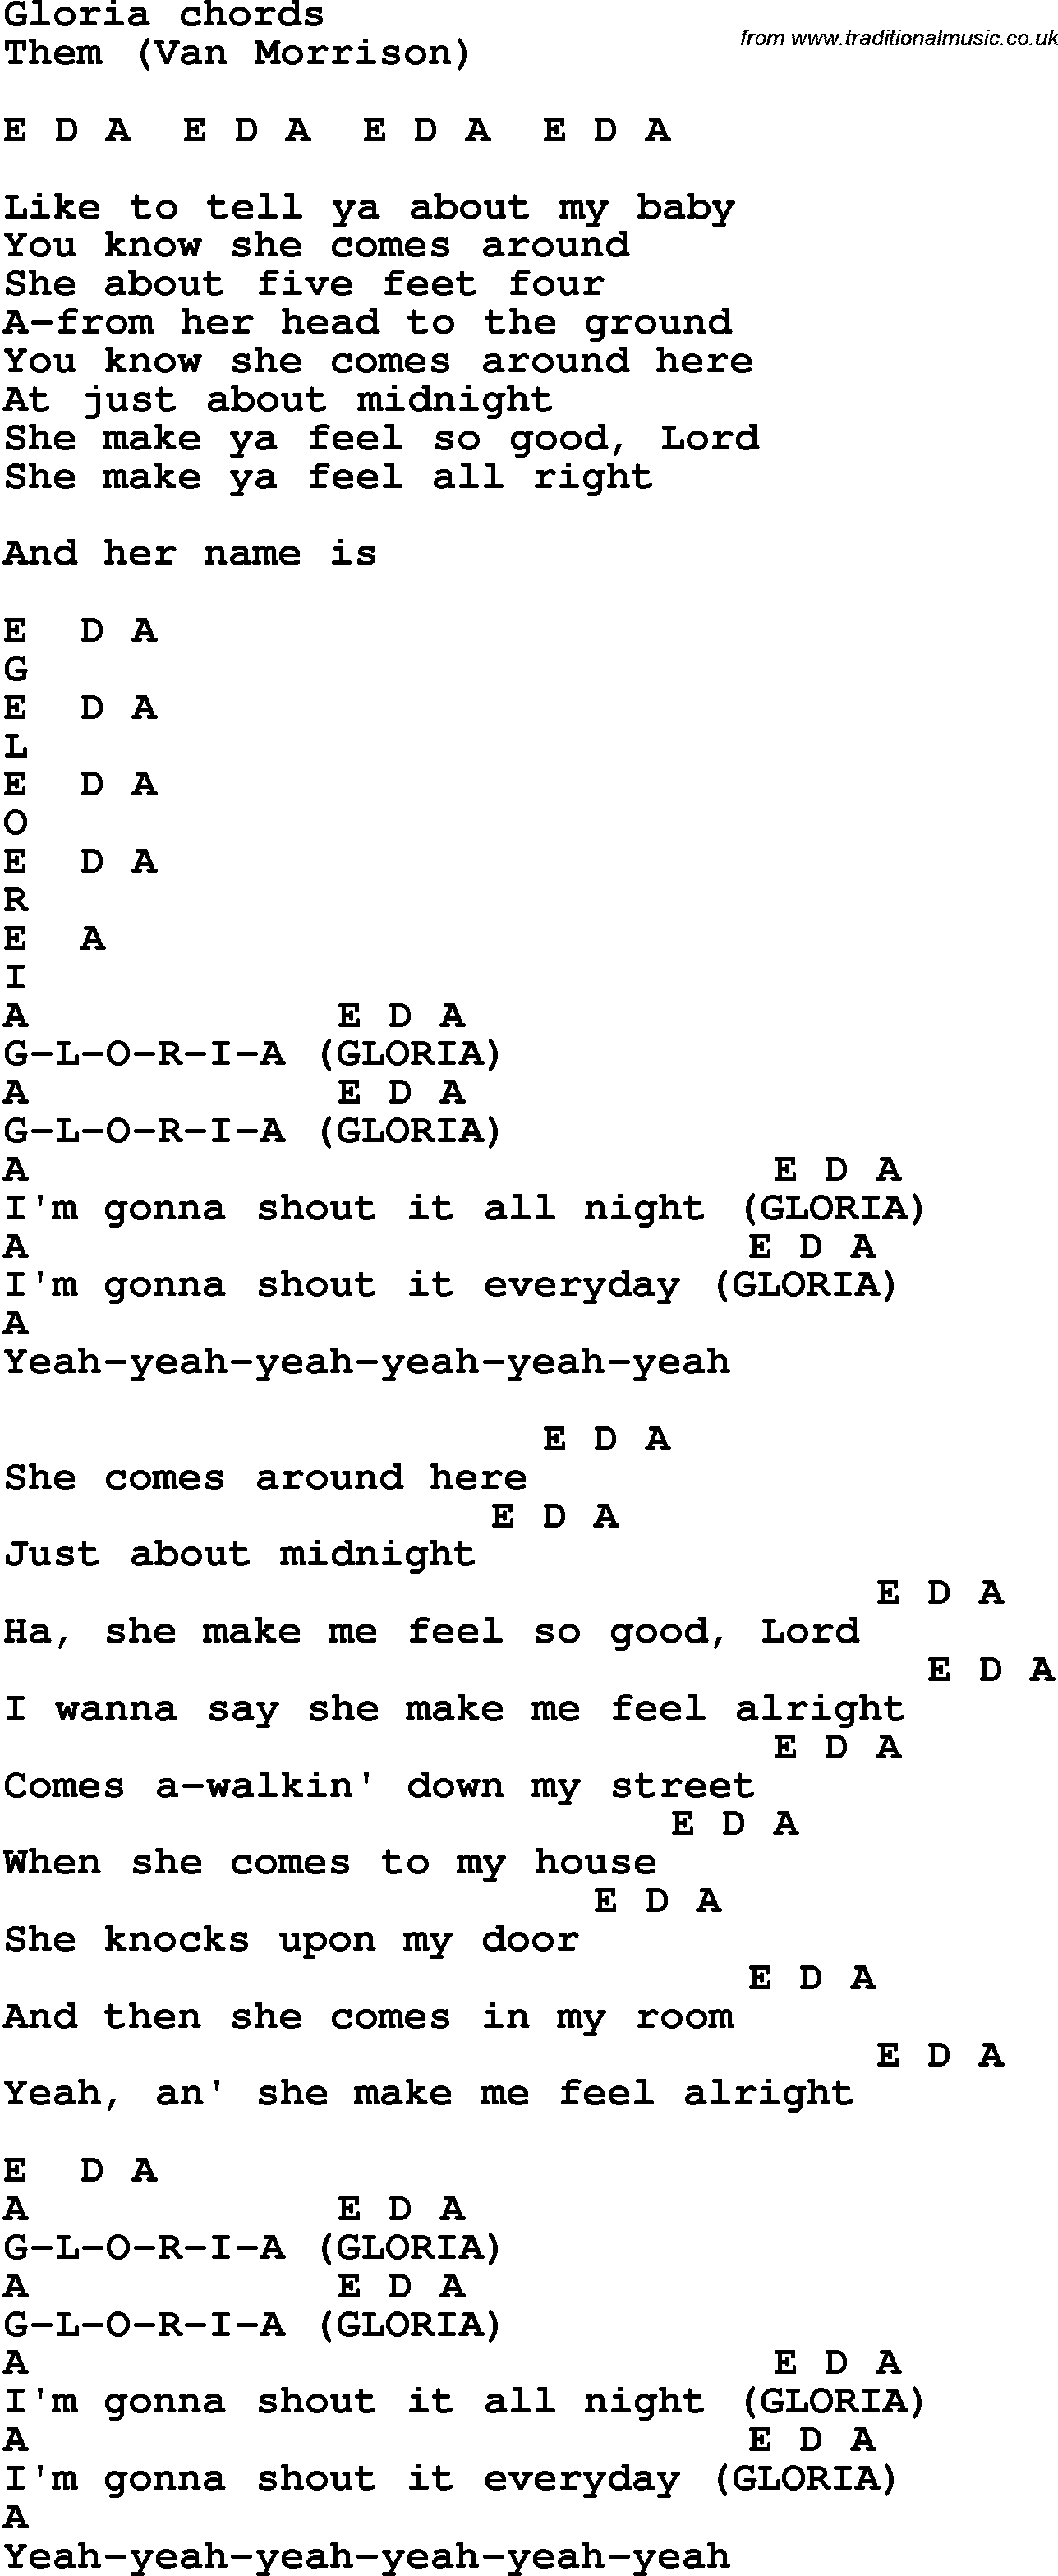 Song Lyrics with guitar chords for Gloria - Them